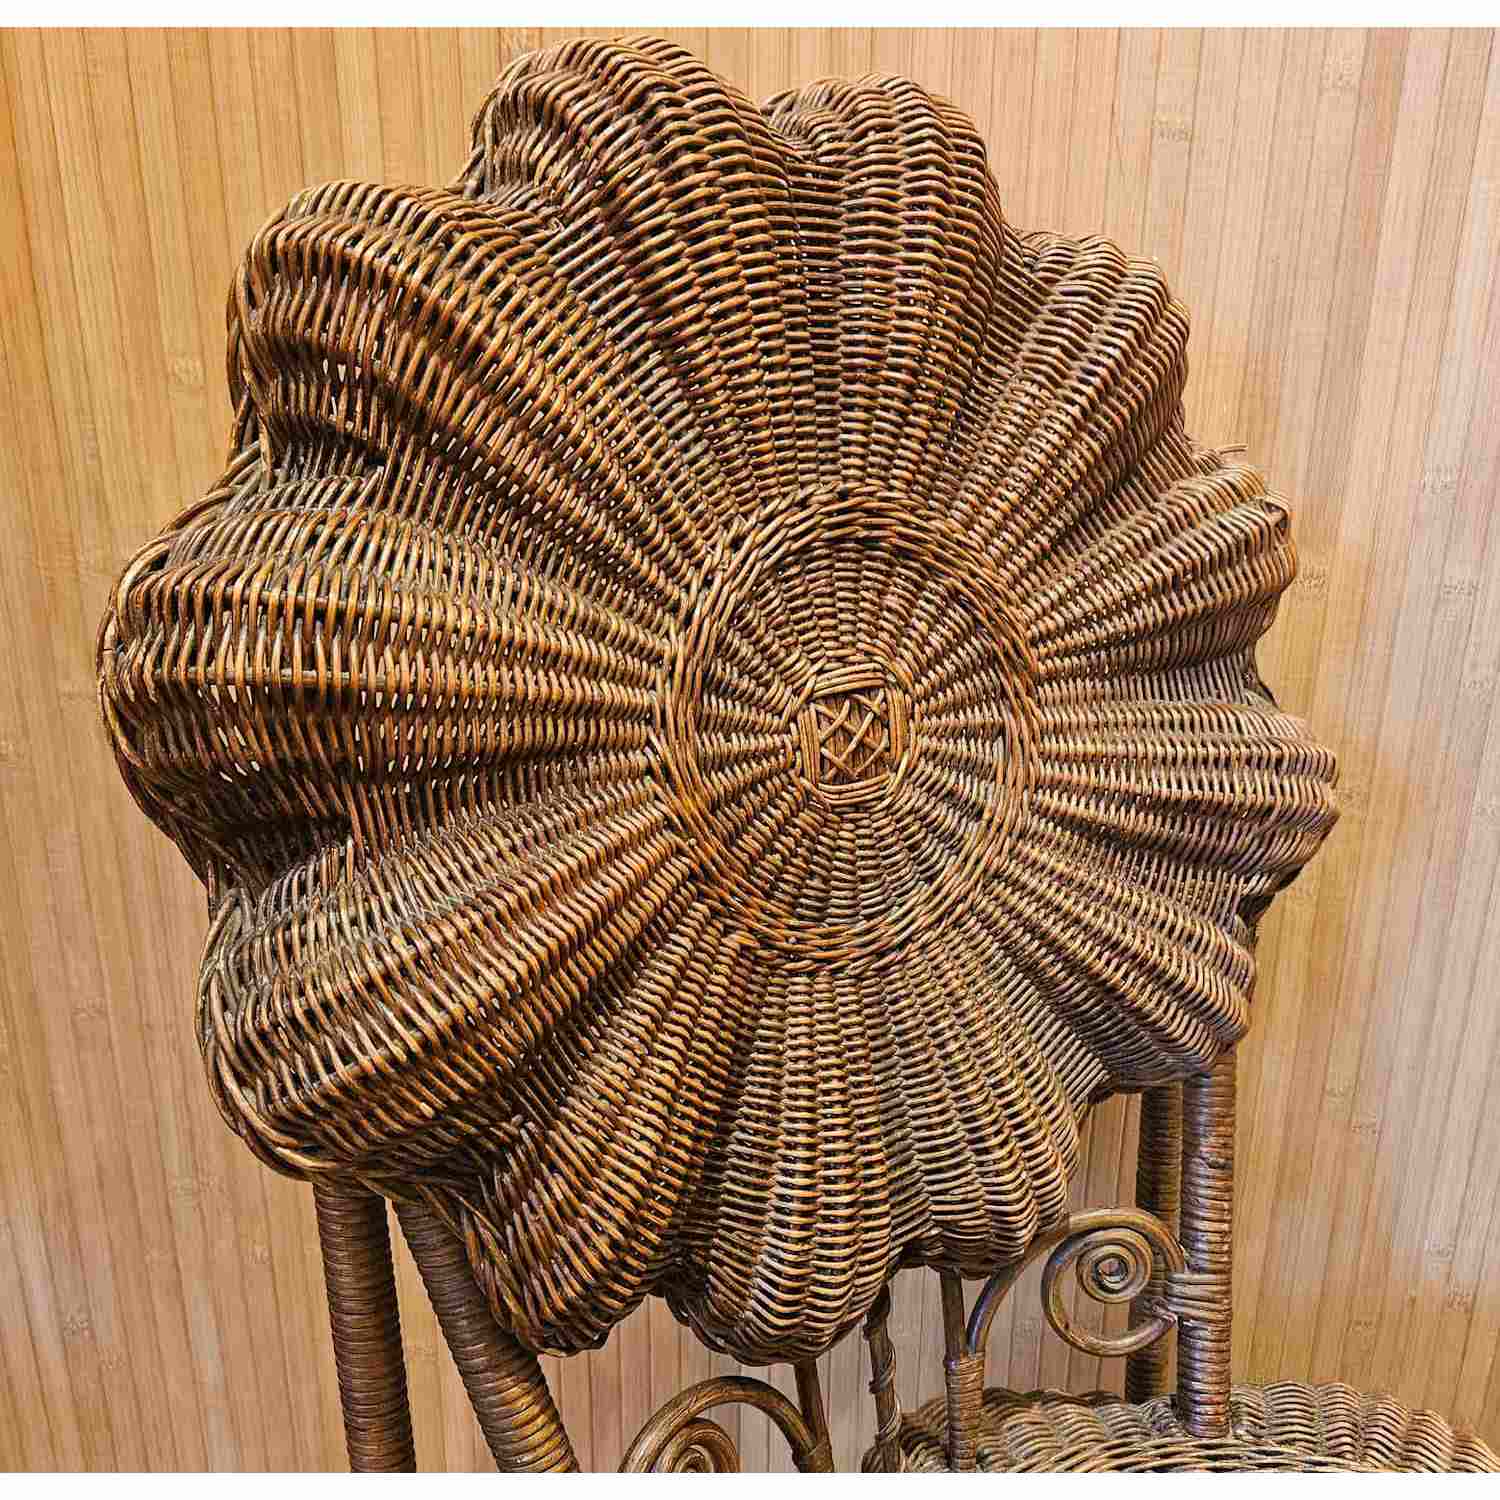 Victorian Wicker Chair by Heywood Brothers